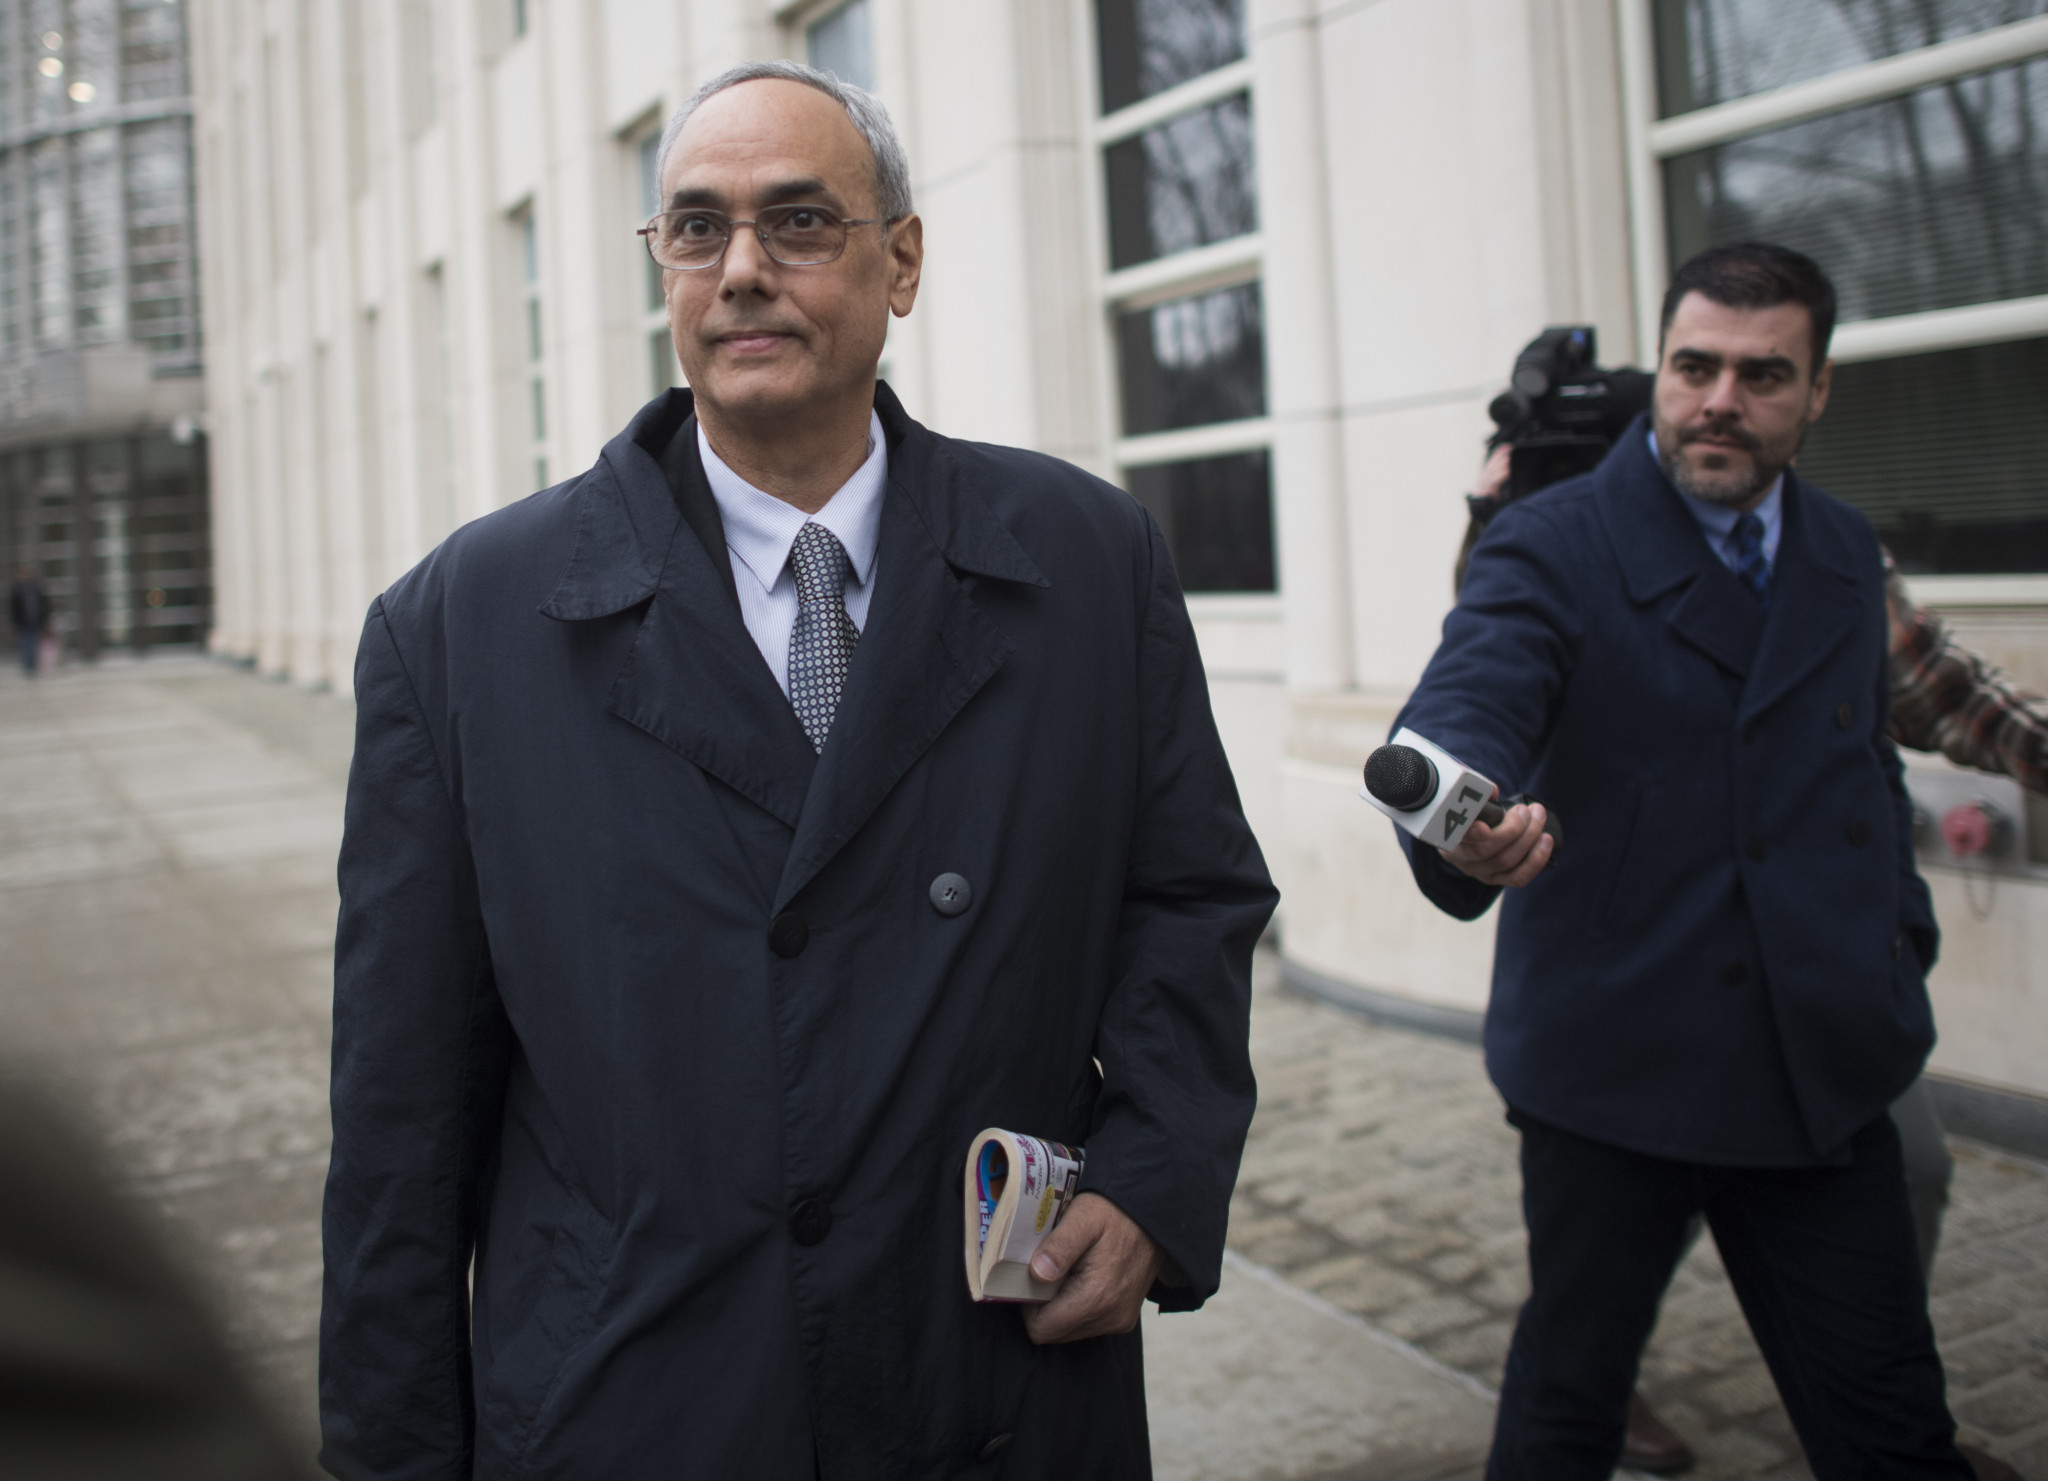 Former Peruvian Football Federation President Manuel Burga has been acquitted of all charges against him ©Getty Images